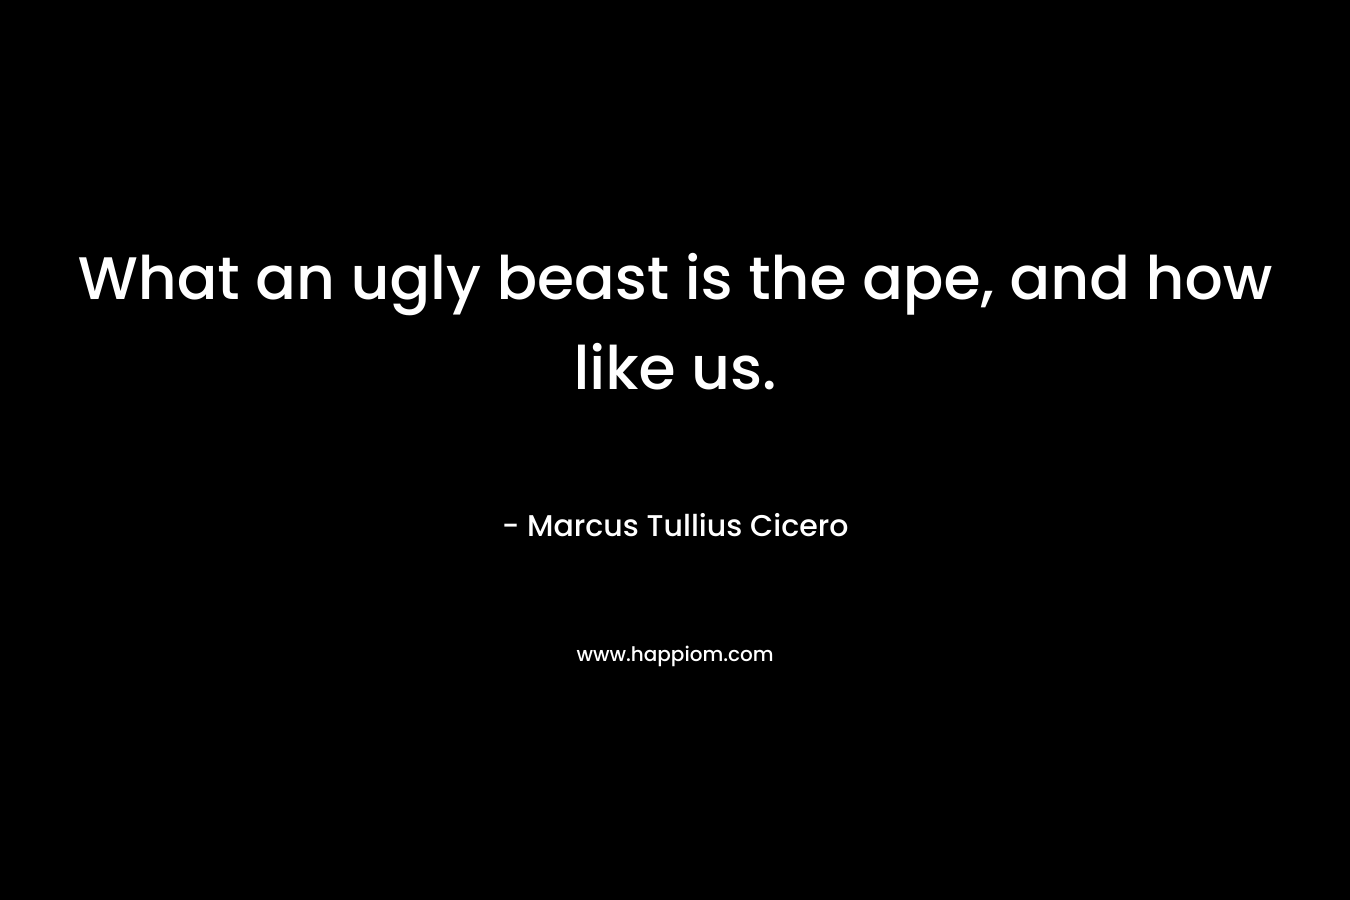 What an ugly beast is the ape, and how like us. – Marcus Tullius Cicero